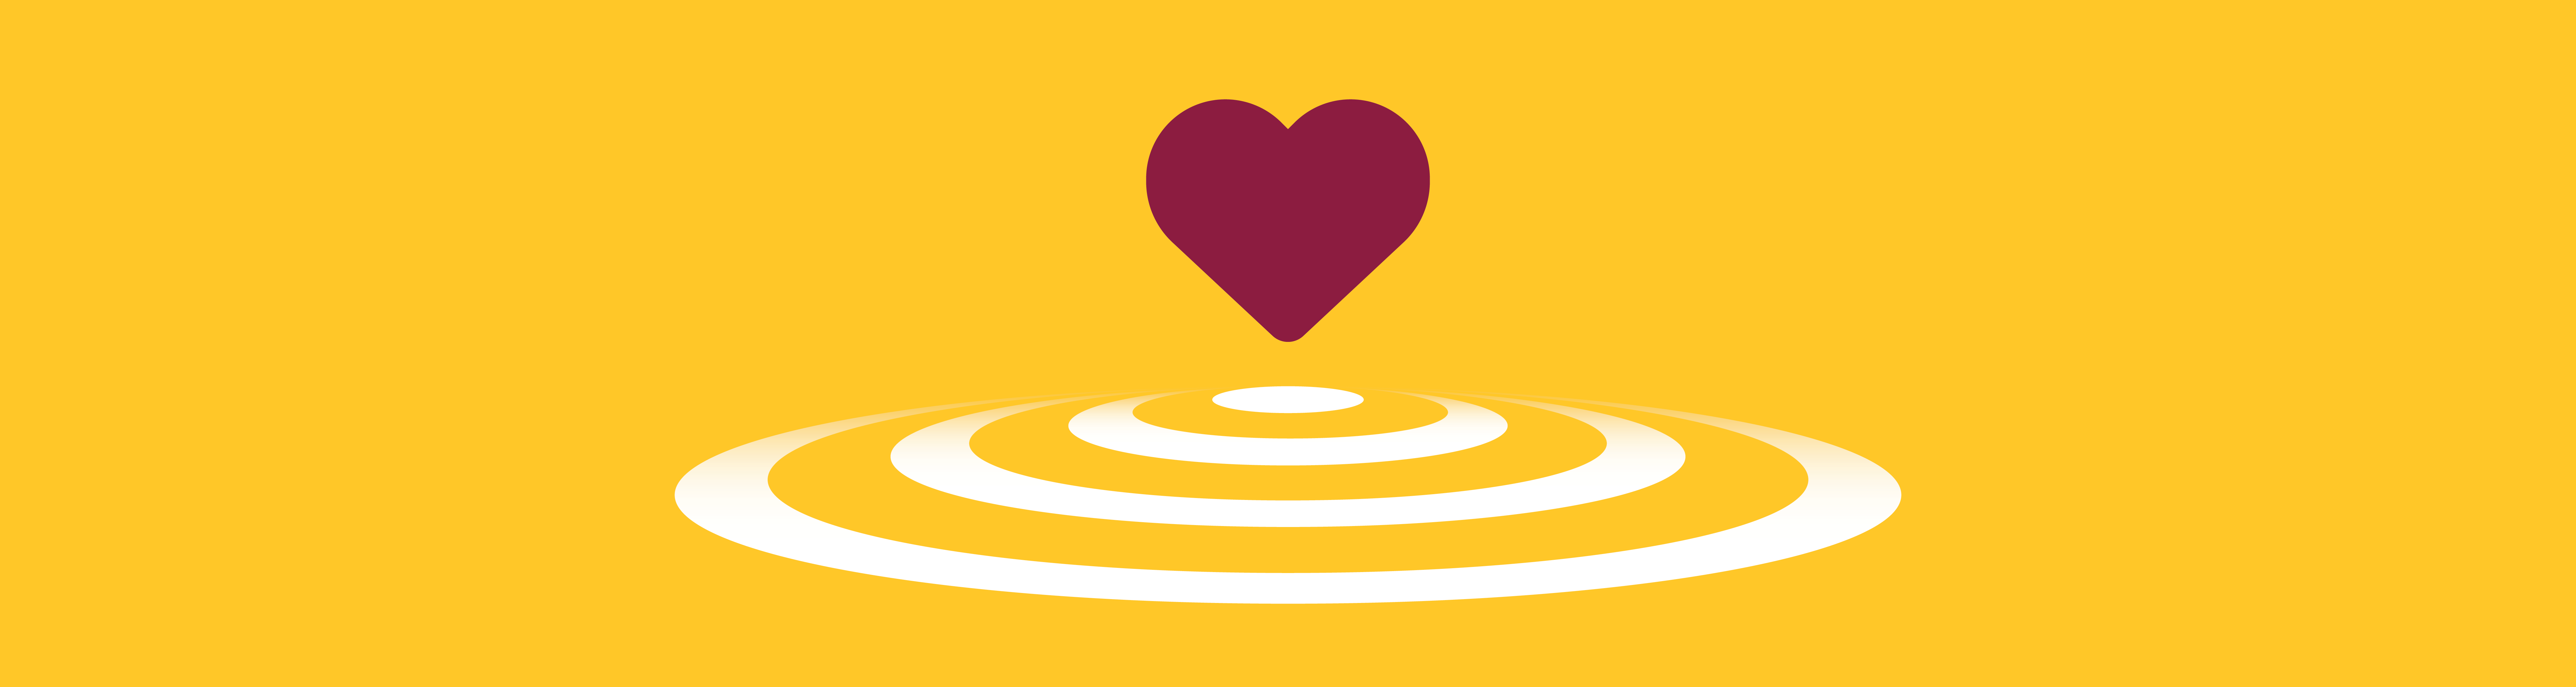 Gold banner with maroon heart floating above white circular waves indicating ripples in water.